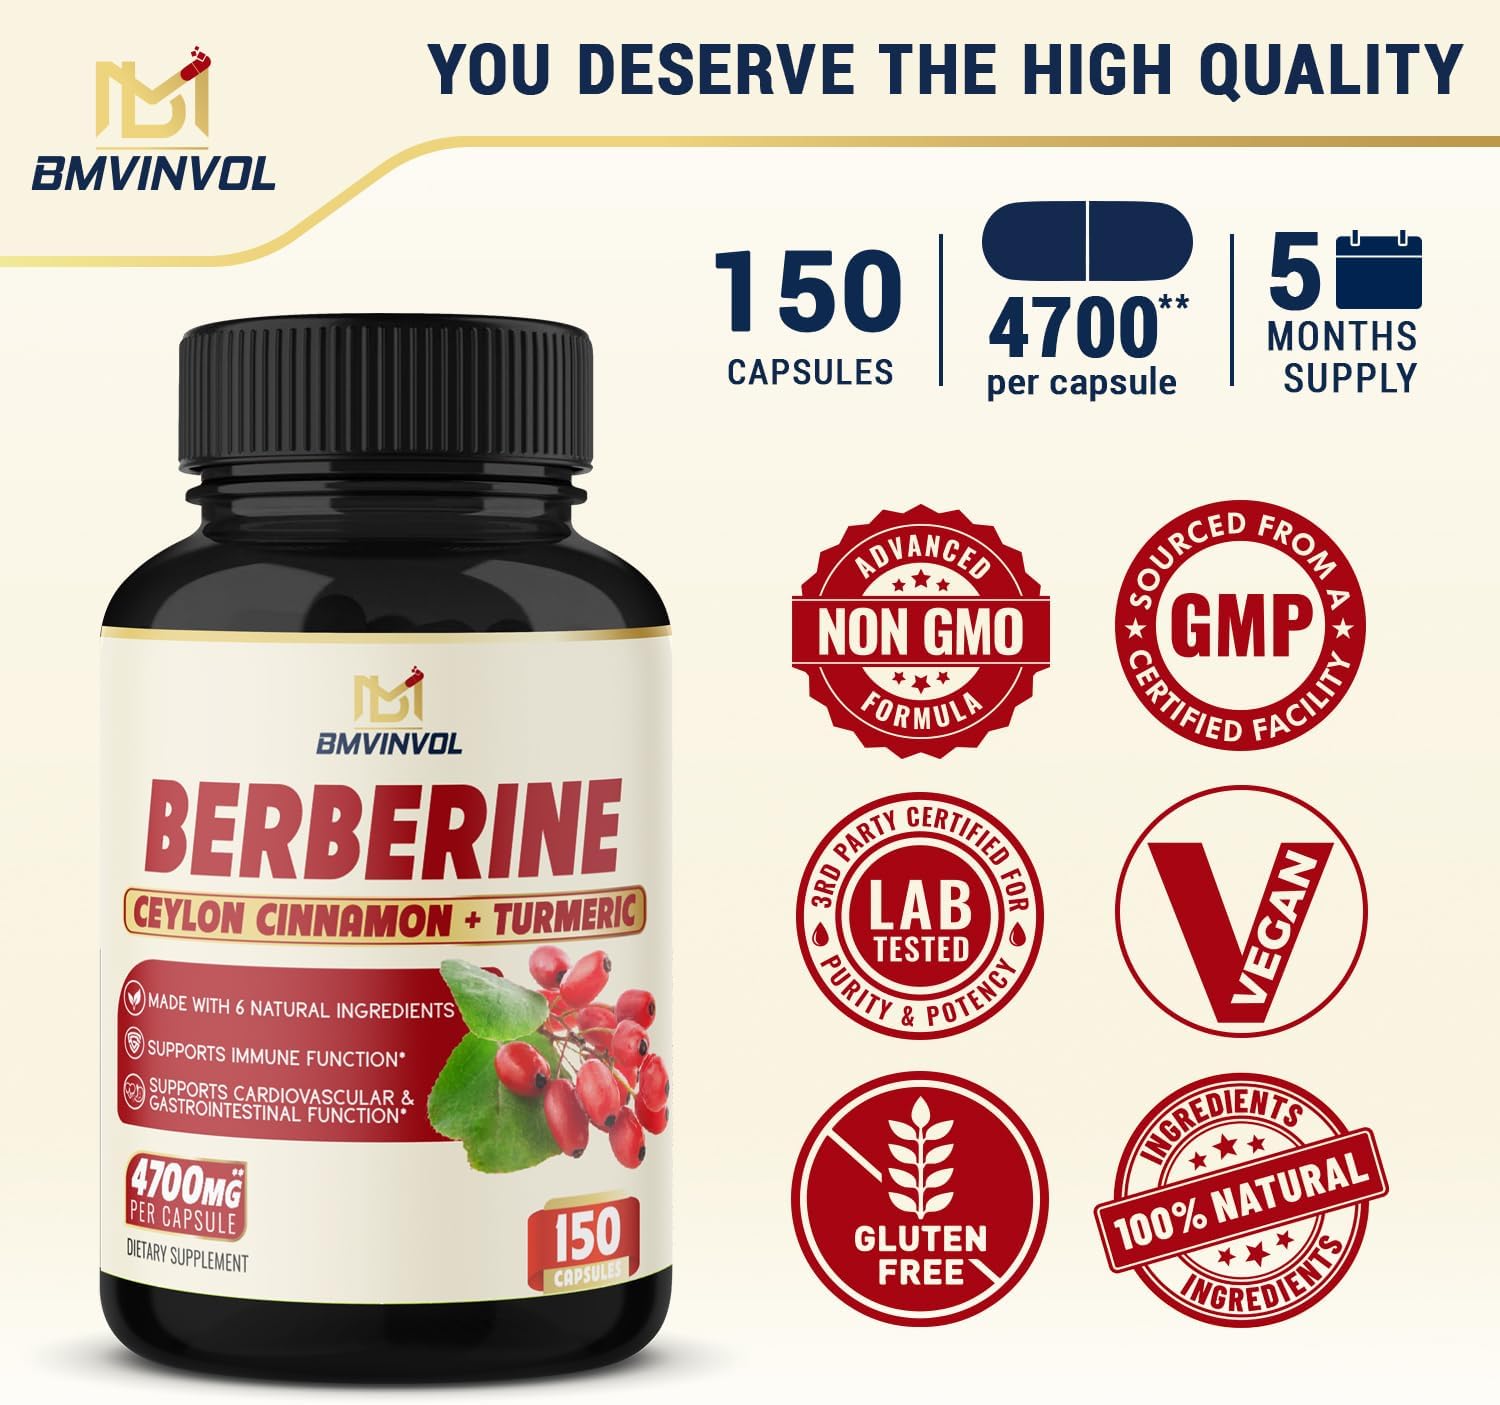 Berberine Supplement 4700mg - 5 Months Supply - High Potency with Ceylon Cinnamon, Turmeric - Supports Immune System, Cardiovascular  Gastrointestinal Function - Berberine HCl Supplement Pills